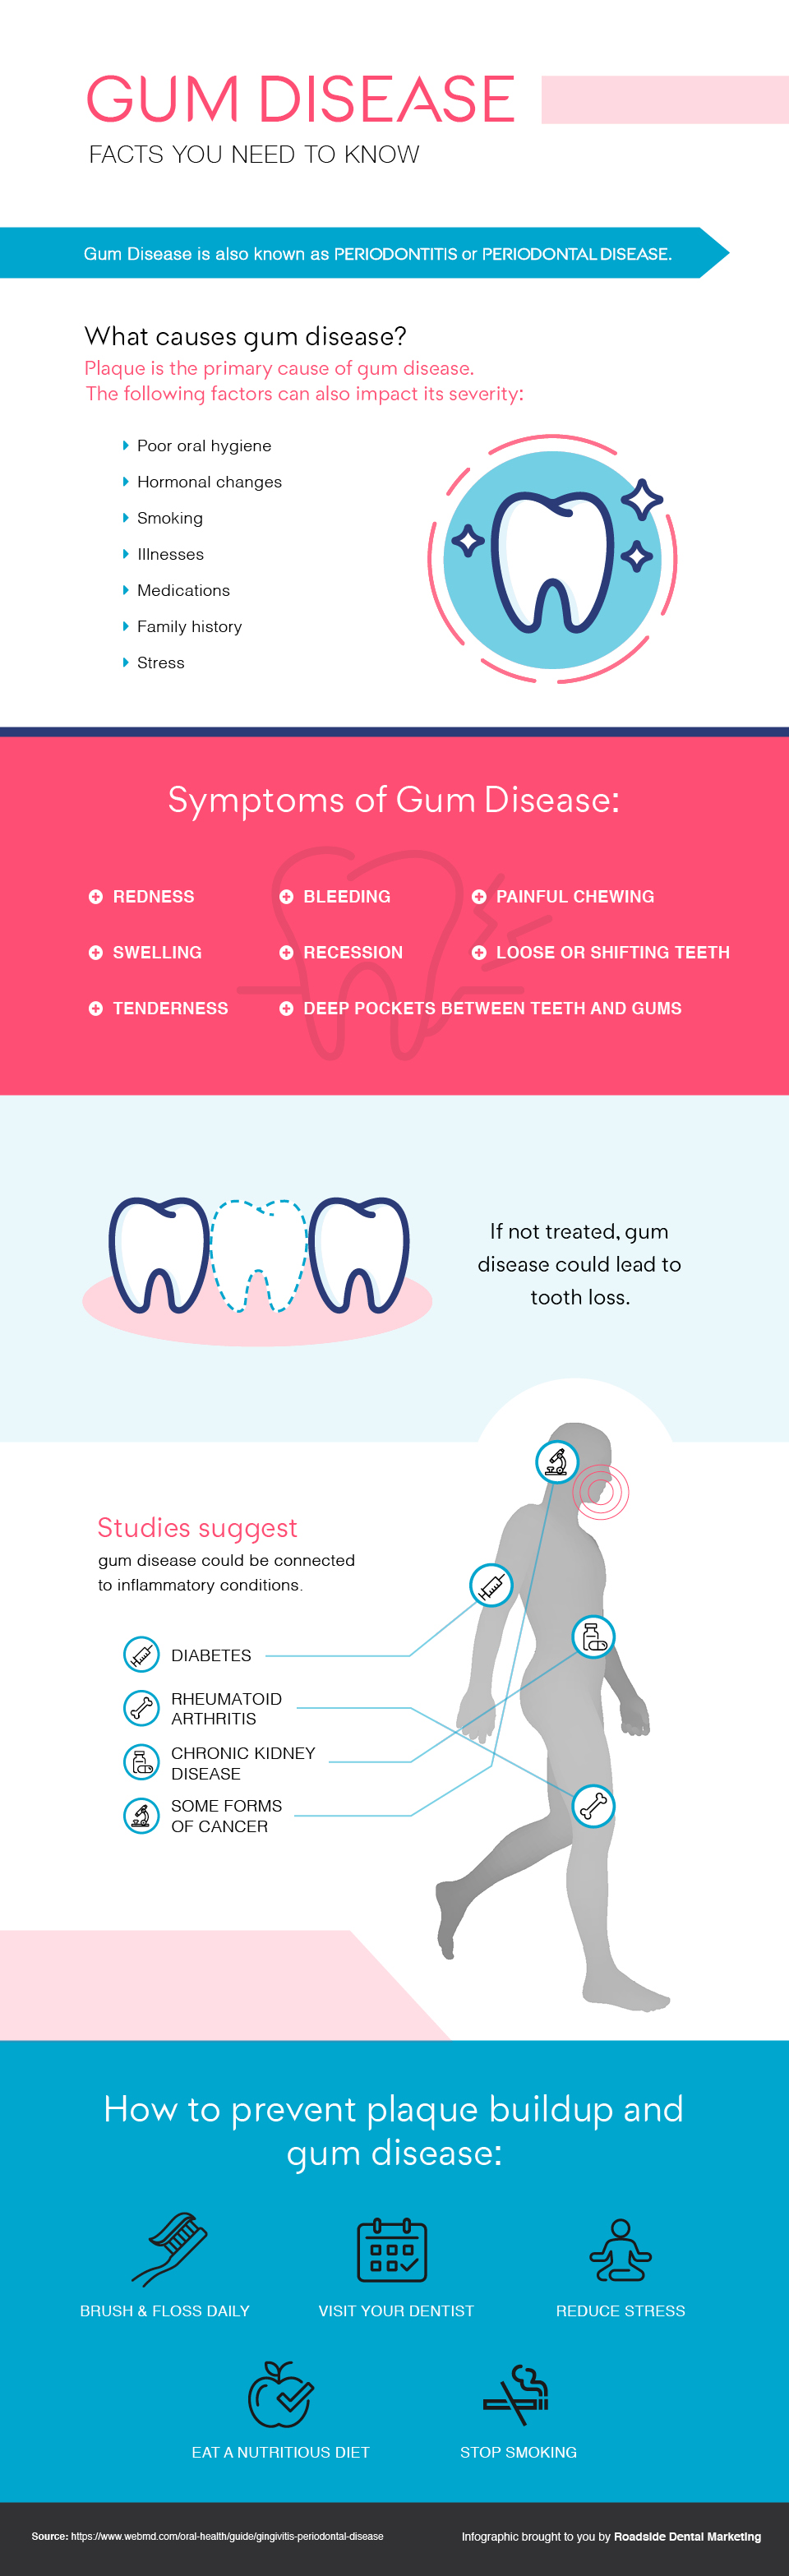 Learn how to handle common dental emergencies in this infographic.